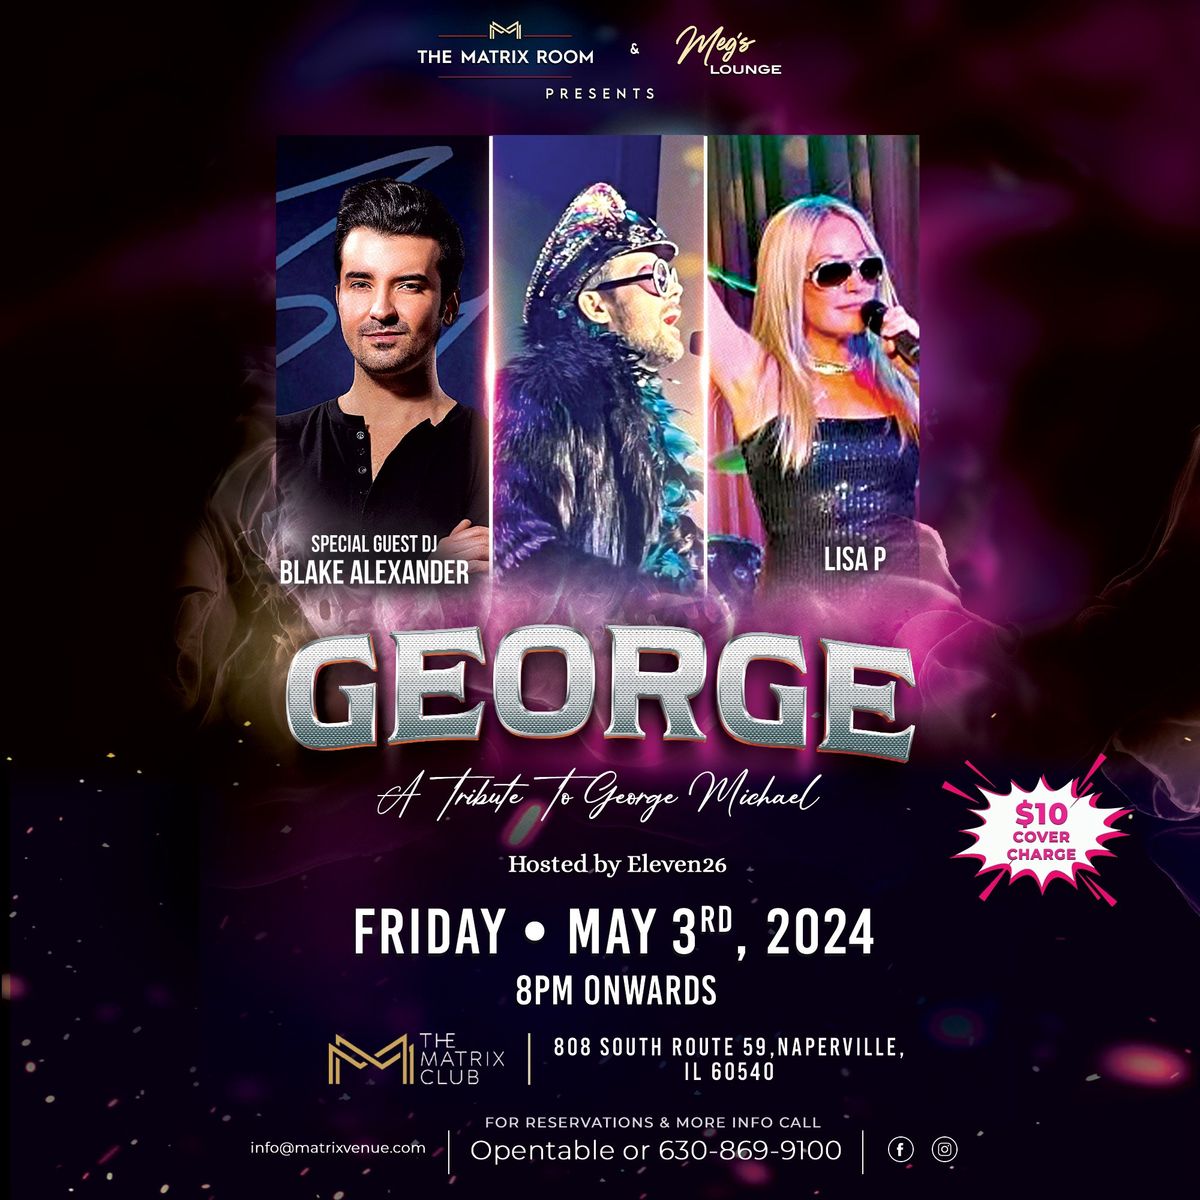 George: A Tribute to George Michael live at The Matrix Room & Meg's Lounge